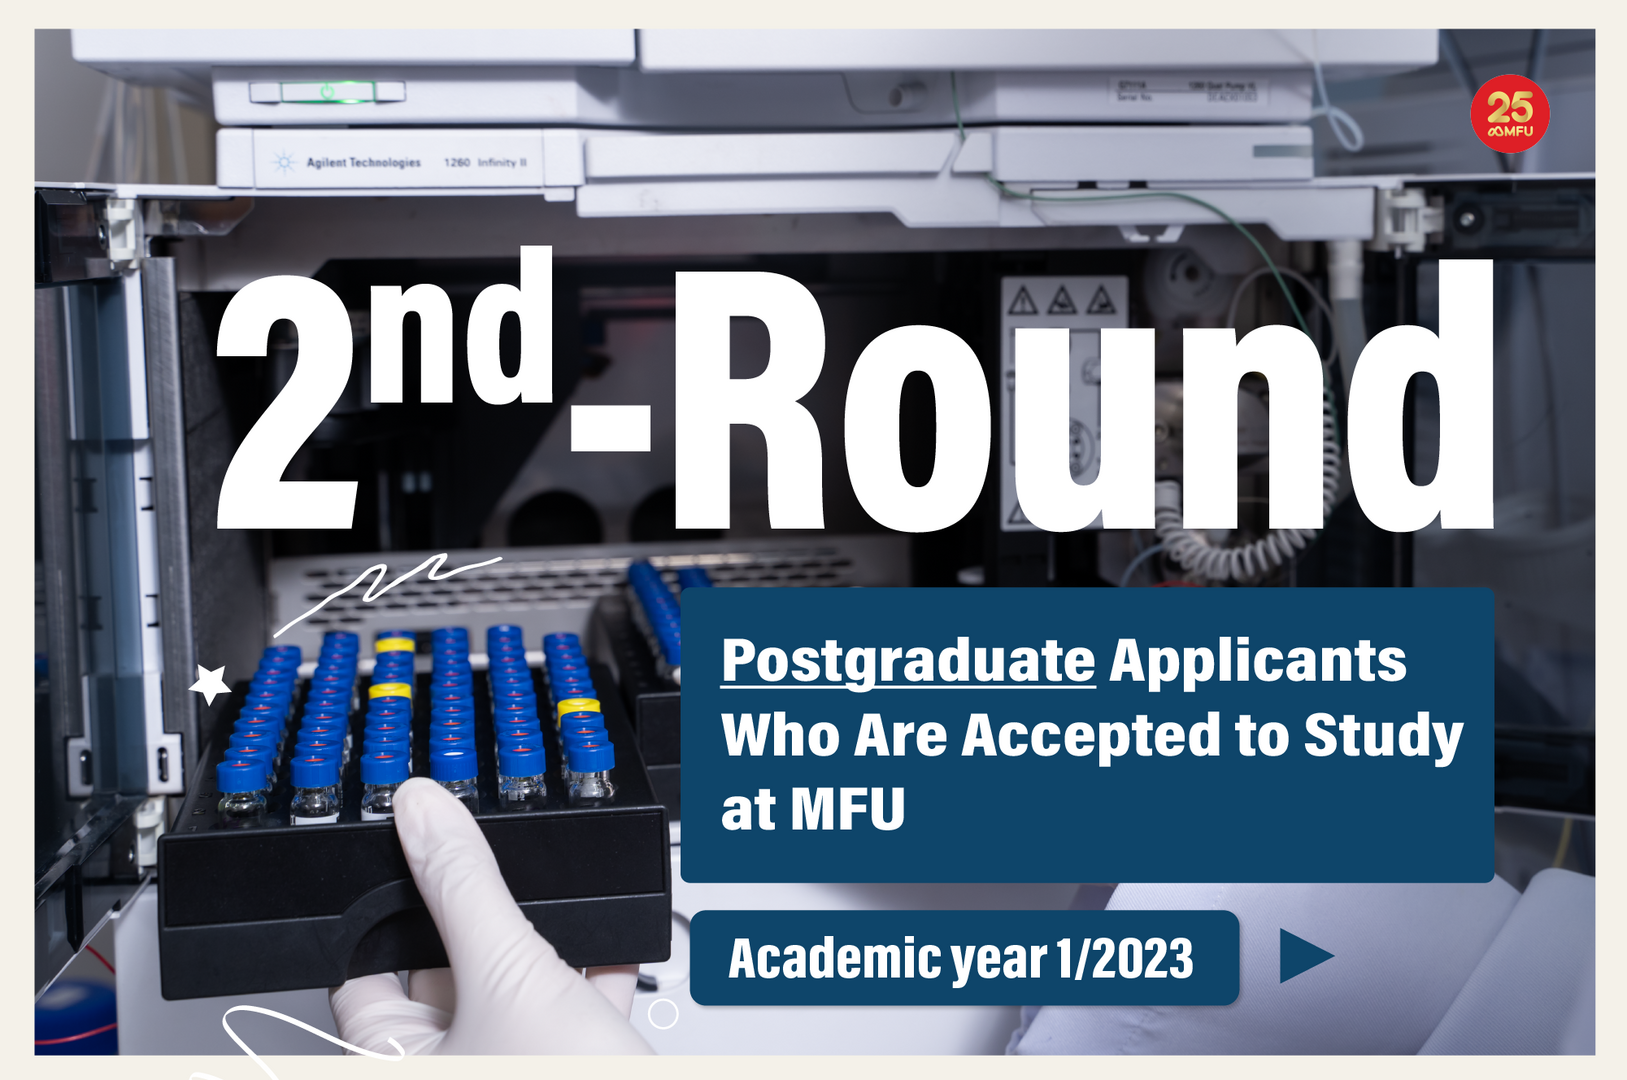 Announcement of the 2nd-Round Postgraduate Applicants Who Are Accepted to Study at MFU 